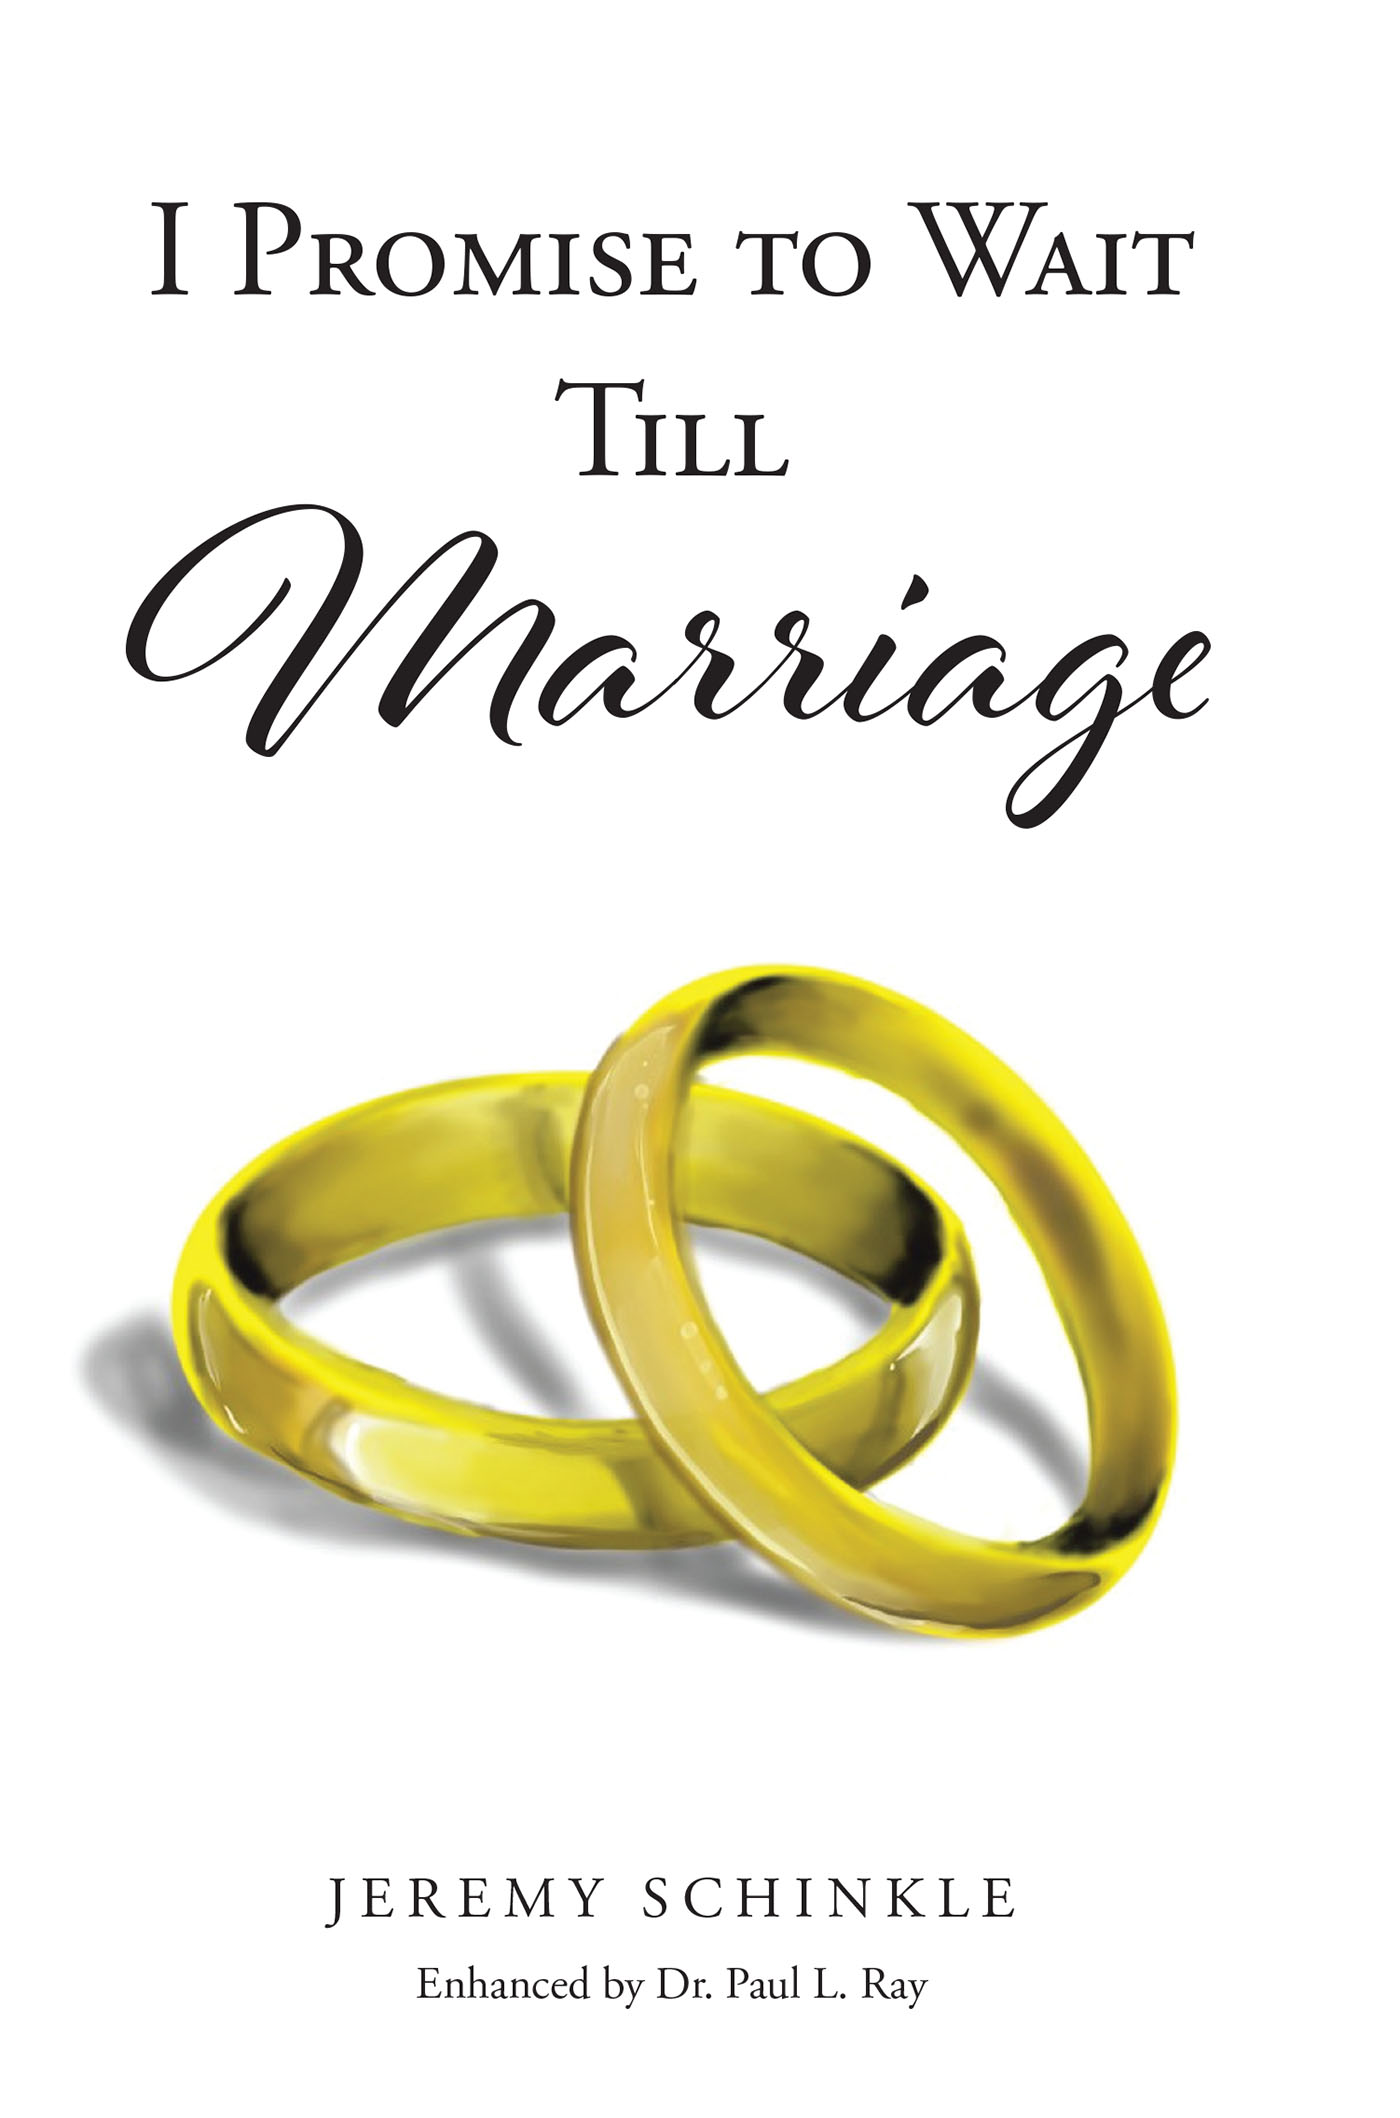 Jeremy Schinkle’s Newly Released "I Promise to Wait Till Marriage" is an Impassioned Call for a Return to More Traditional Values and Purity Principles